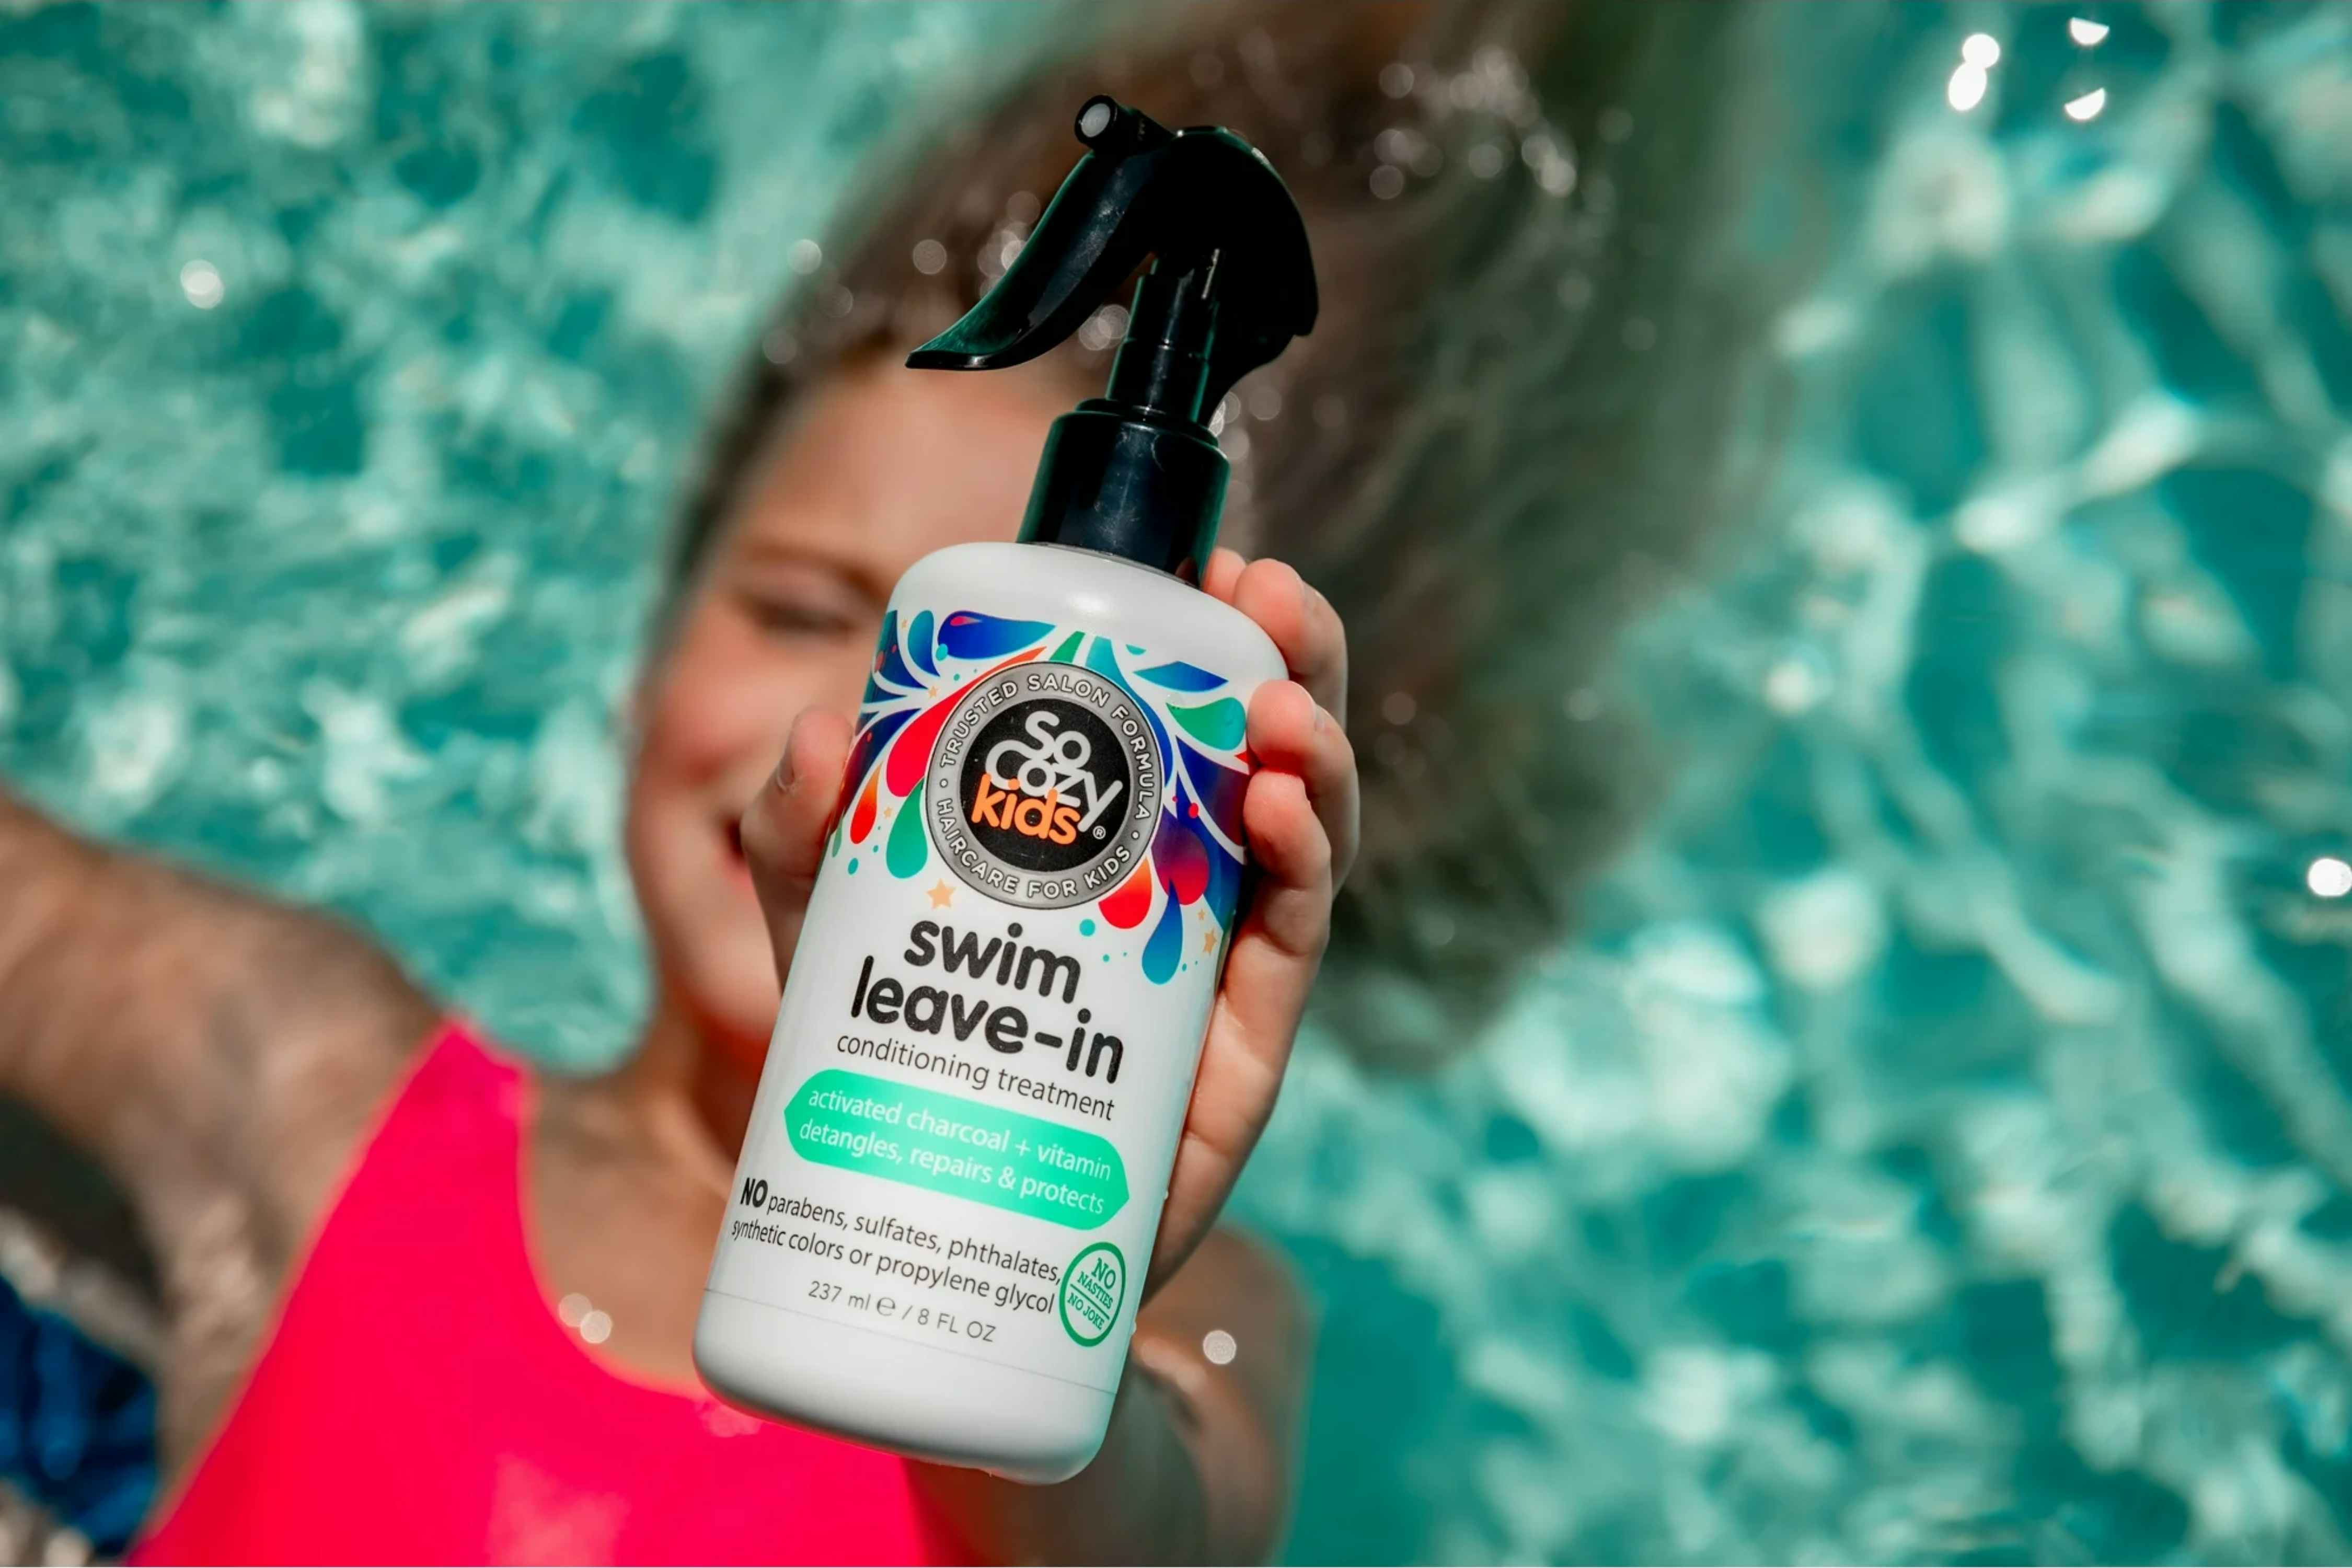 SoCozy Kids' Swim Leave-In Conditioner, as Low as $6.49 With Amazon Coupon